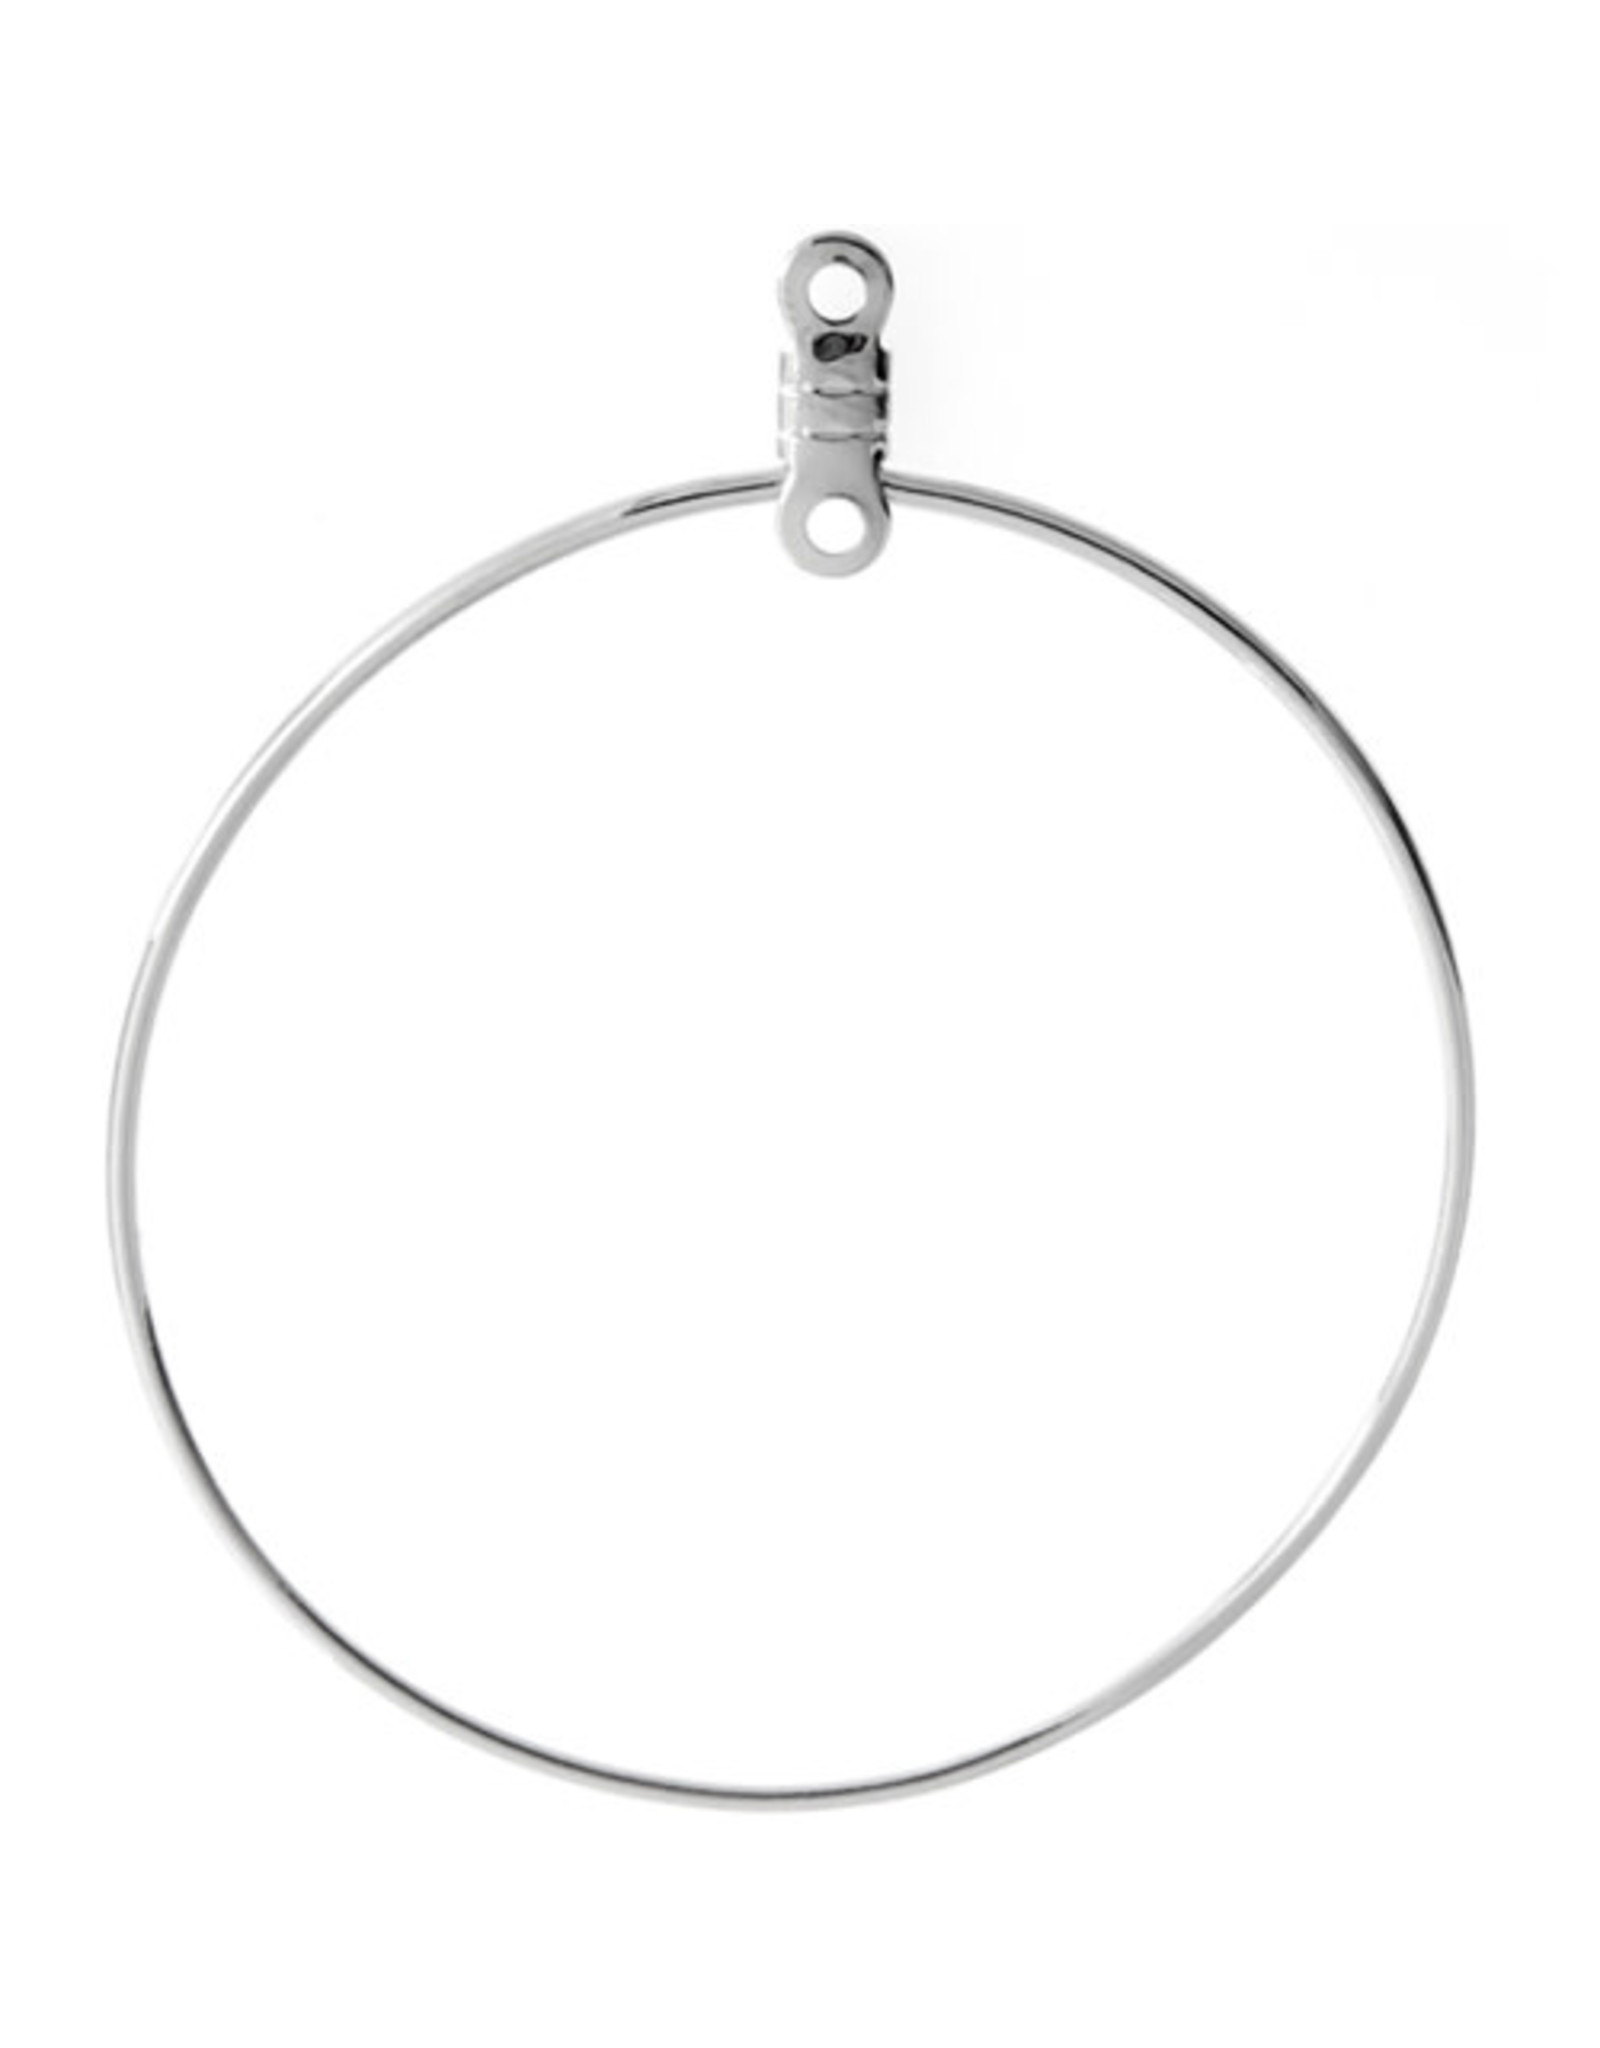 Earring Hoops with Link 38mm Nickel Colour NF x10